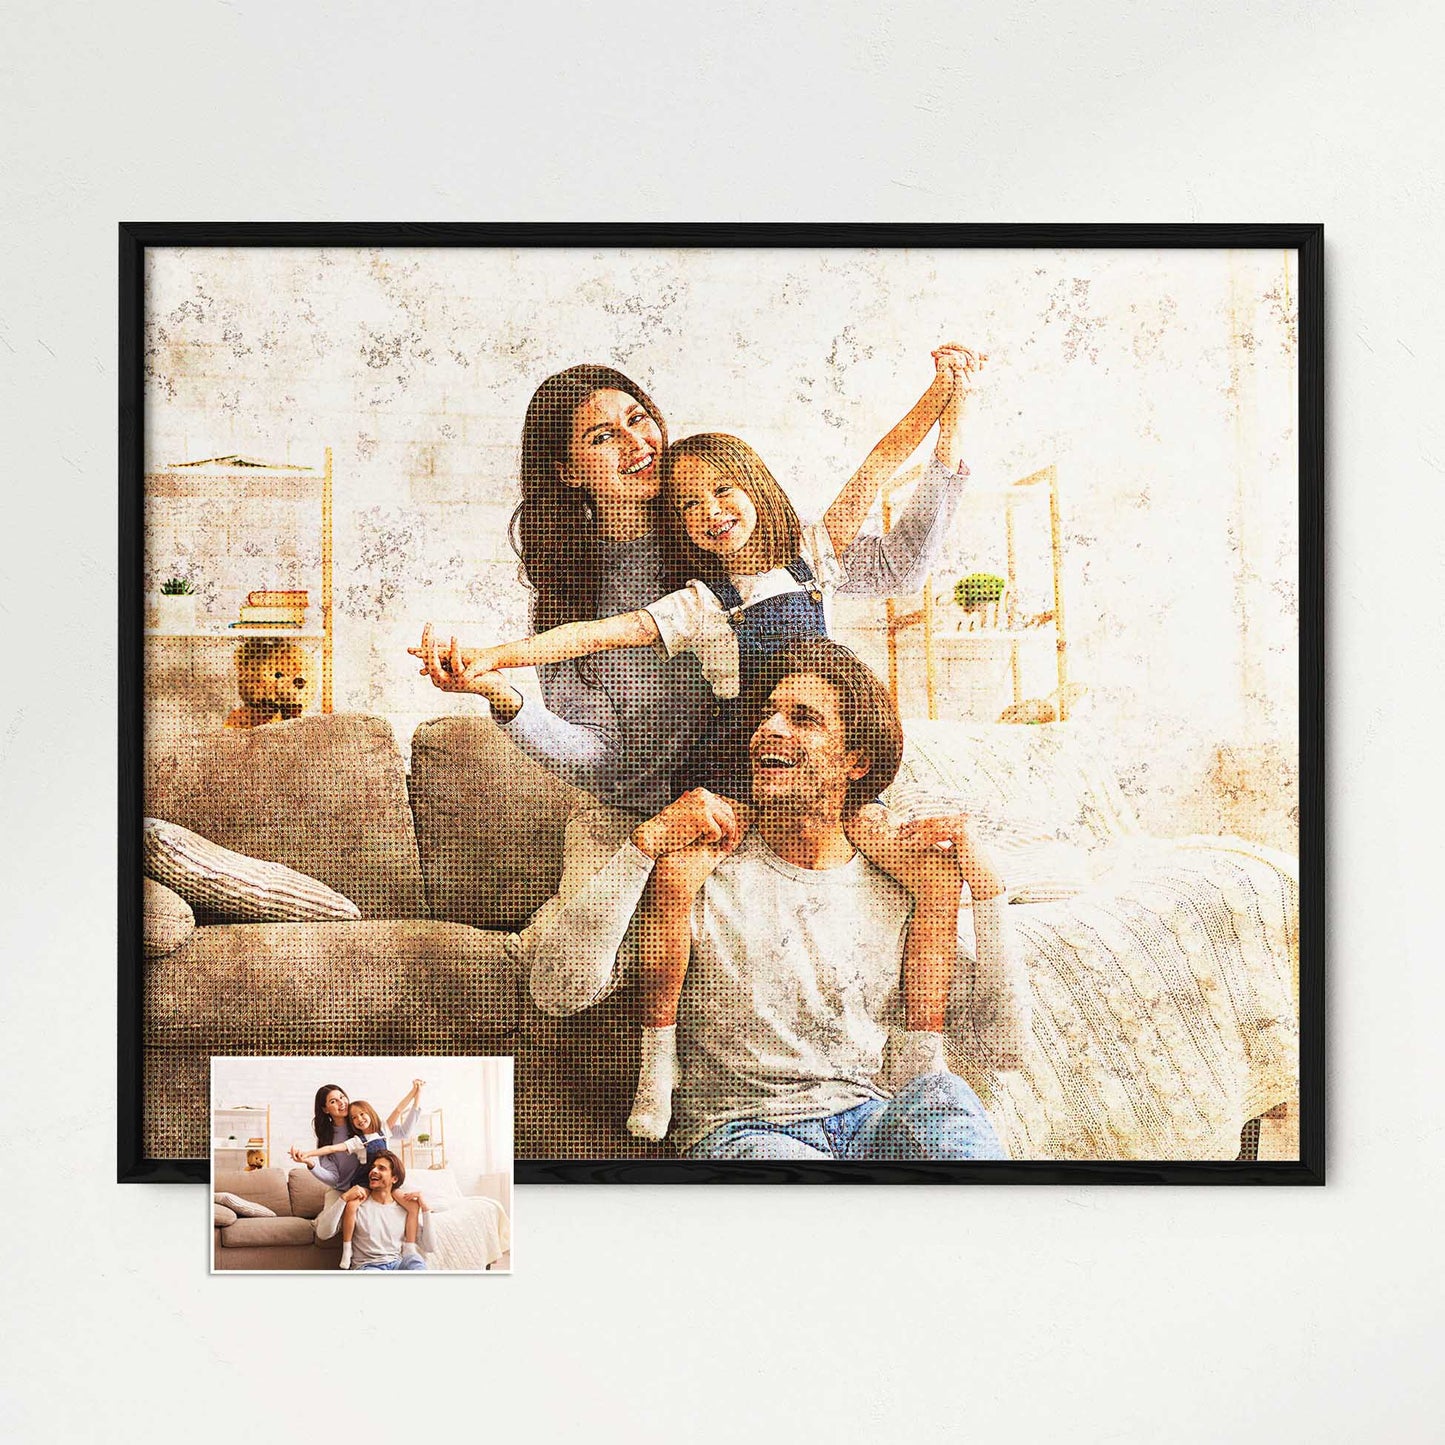 Immerse yourself in the captivating world of the Personalised Grunge FX Framed Print. Its grunge style, enhanced by a halftone effect, gives it a retro, old-school charm that exudes coolness and elegance. Crafted with gallery-quality paper 